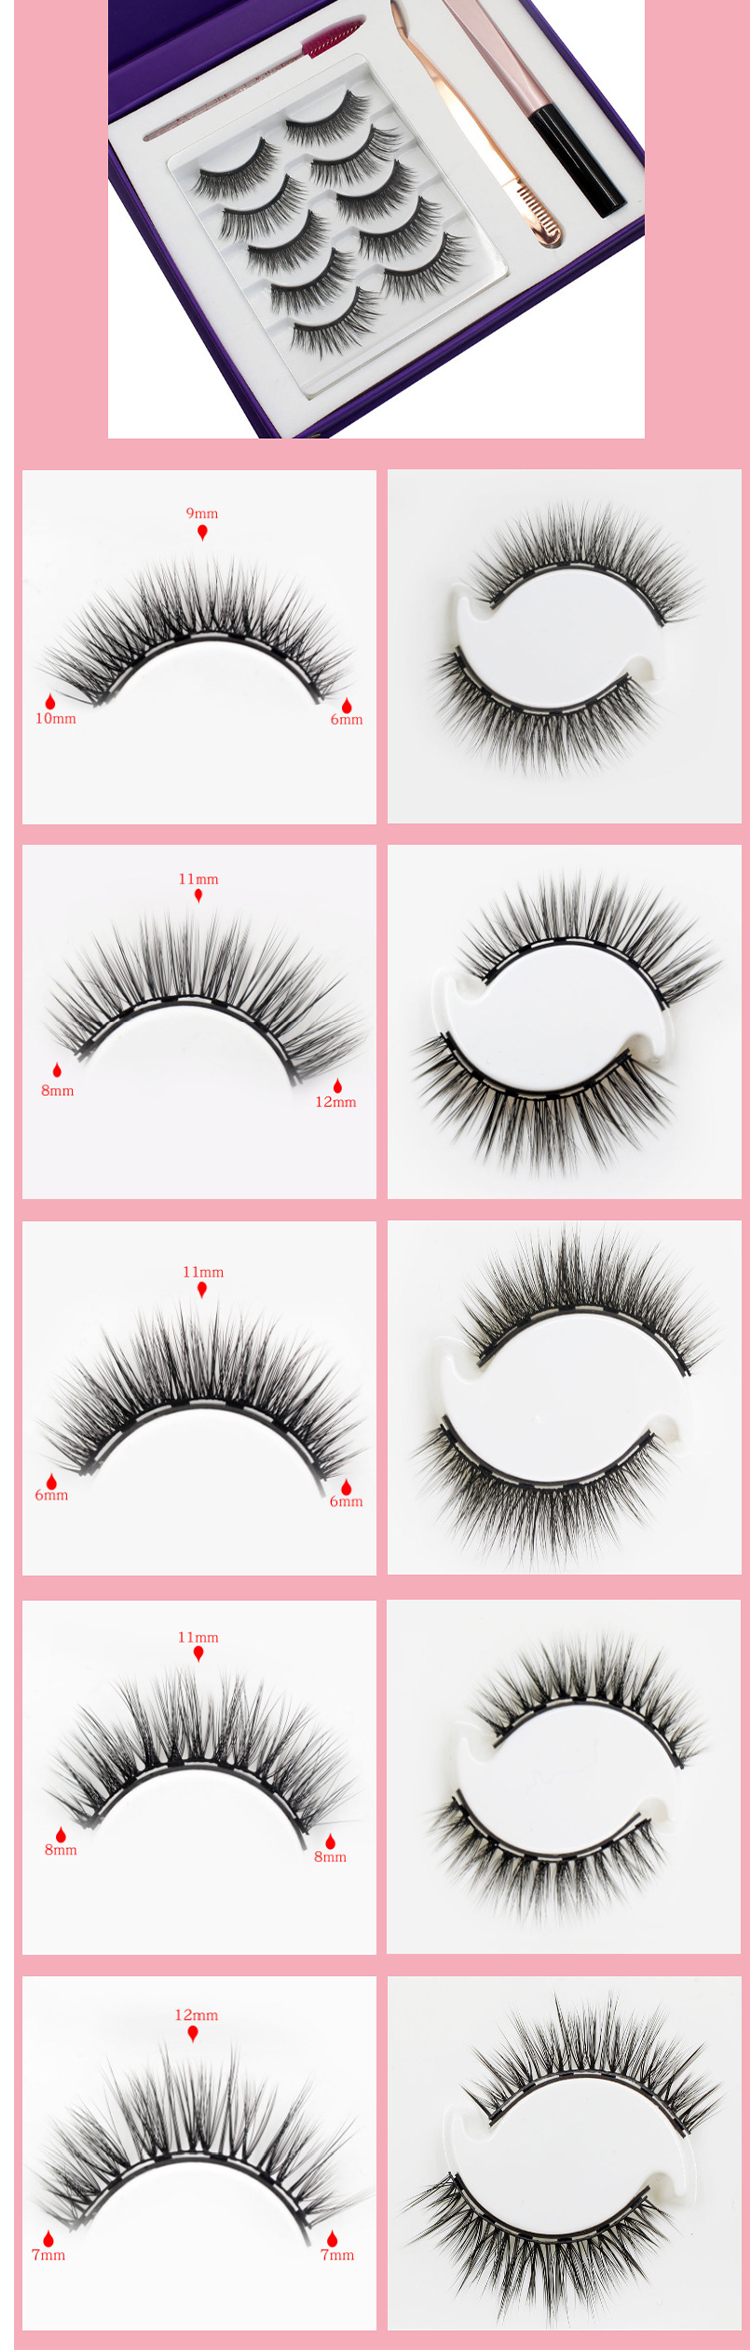 reusable-long-lasting-magnetic-lashes-with-magnetic-eyeliners-combinations.jpg